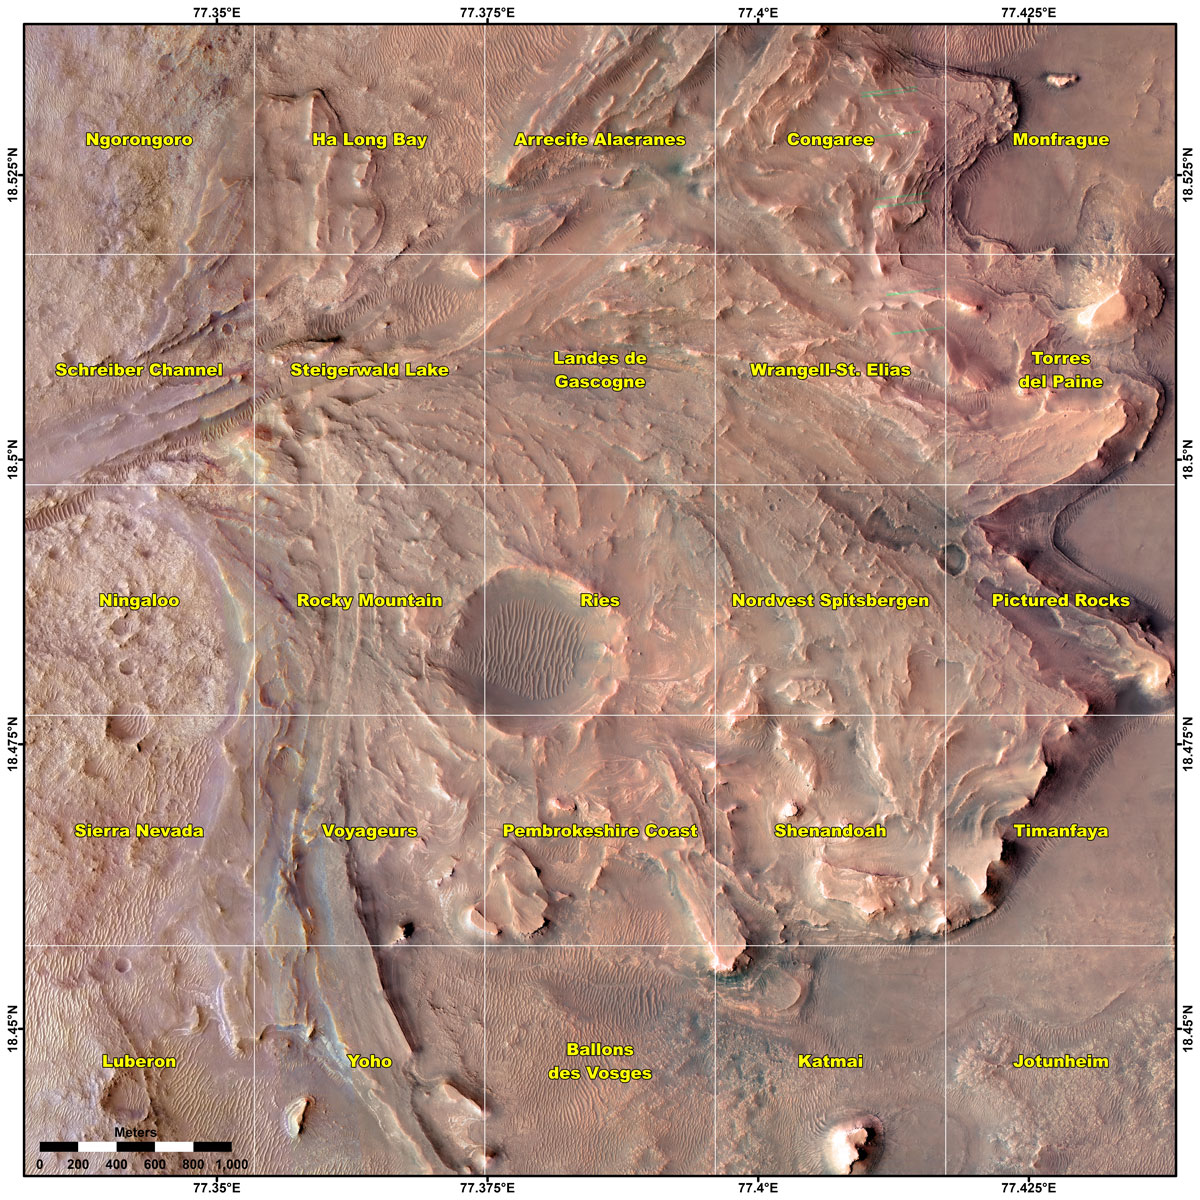 This map shows various quadrant themes in the vicinity of NASA’s Perseverance Mars rover, which is currently in the Rocky Mountain quadrant. The rover team chose quadrant themes related to various national parks across Earth.